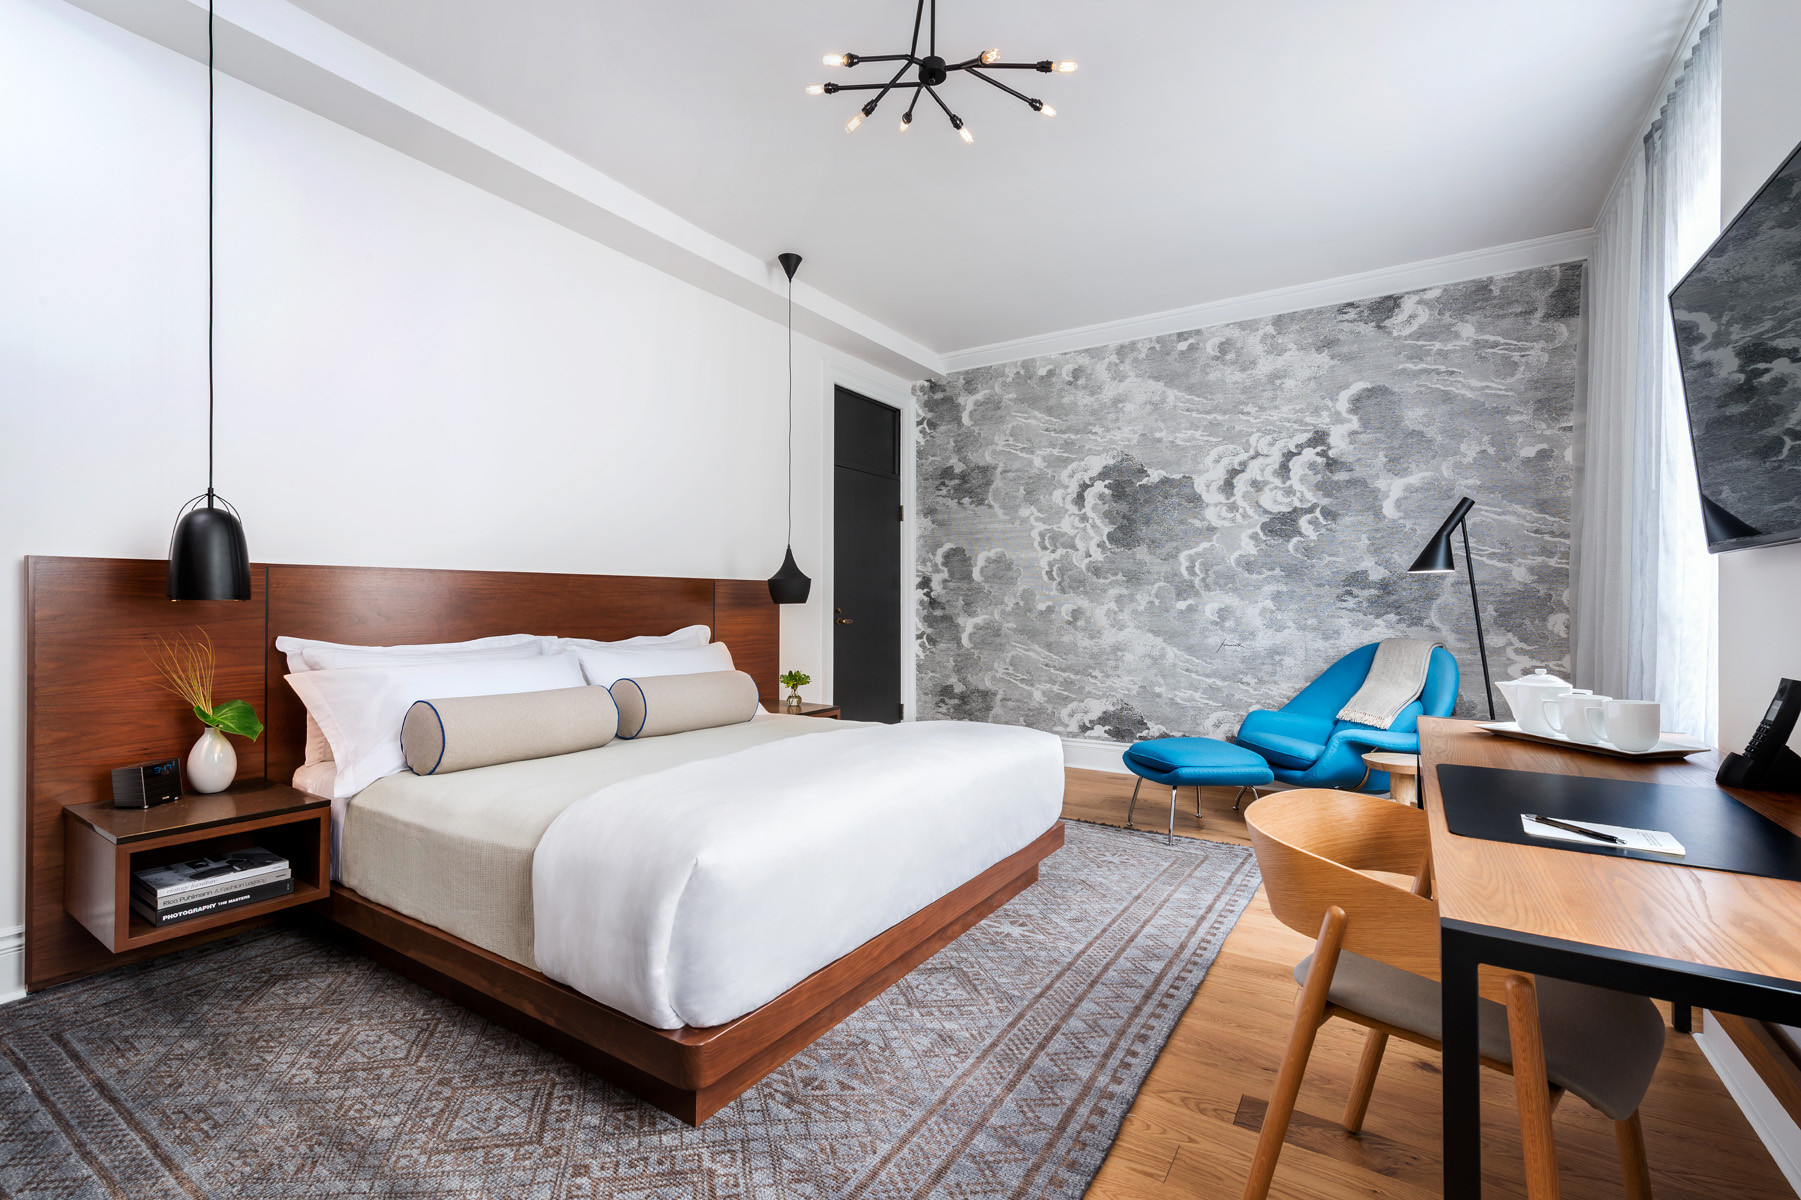 Jill Greaves Design Contemporary Bedroom featuring a custom platform bed in walnut, pendant task lighting and Fornasetti wallpaper mural in "Nuvole".